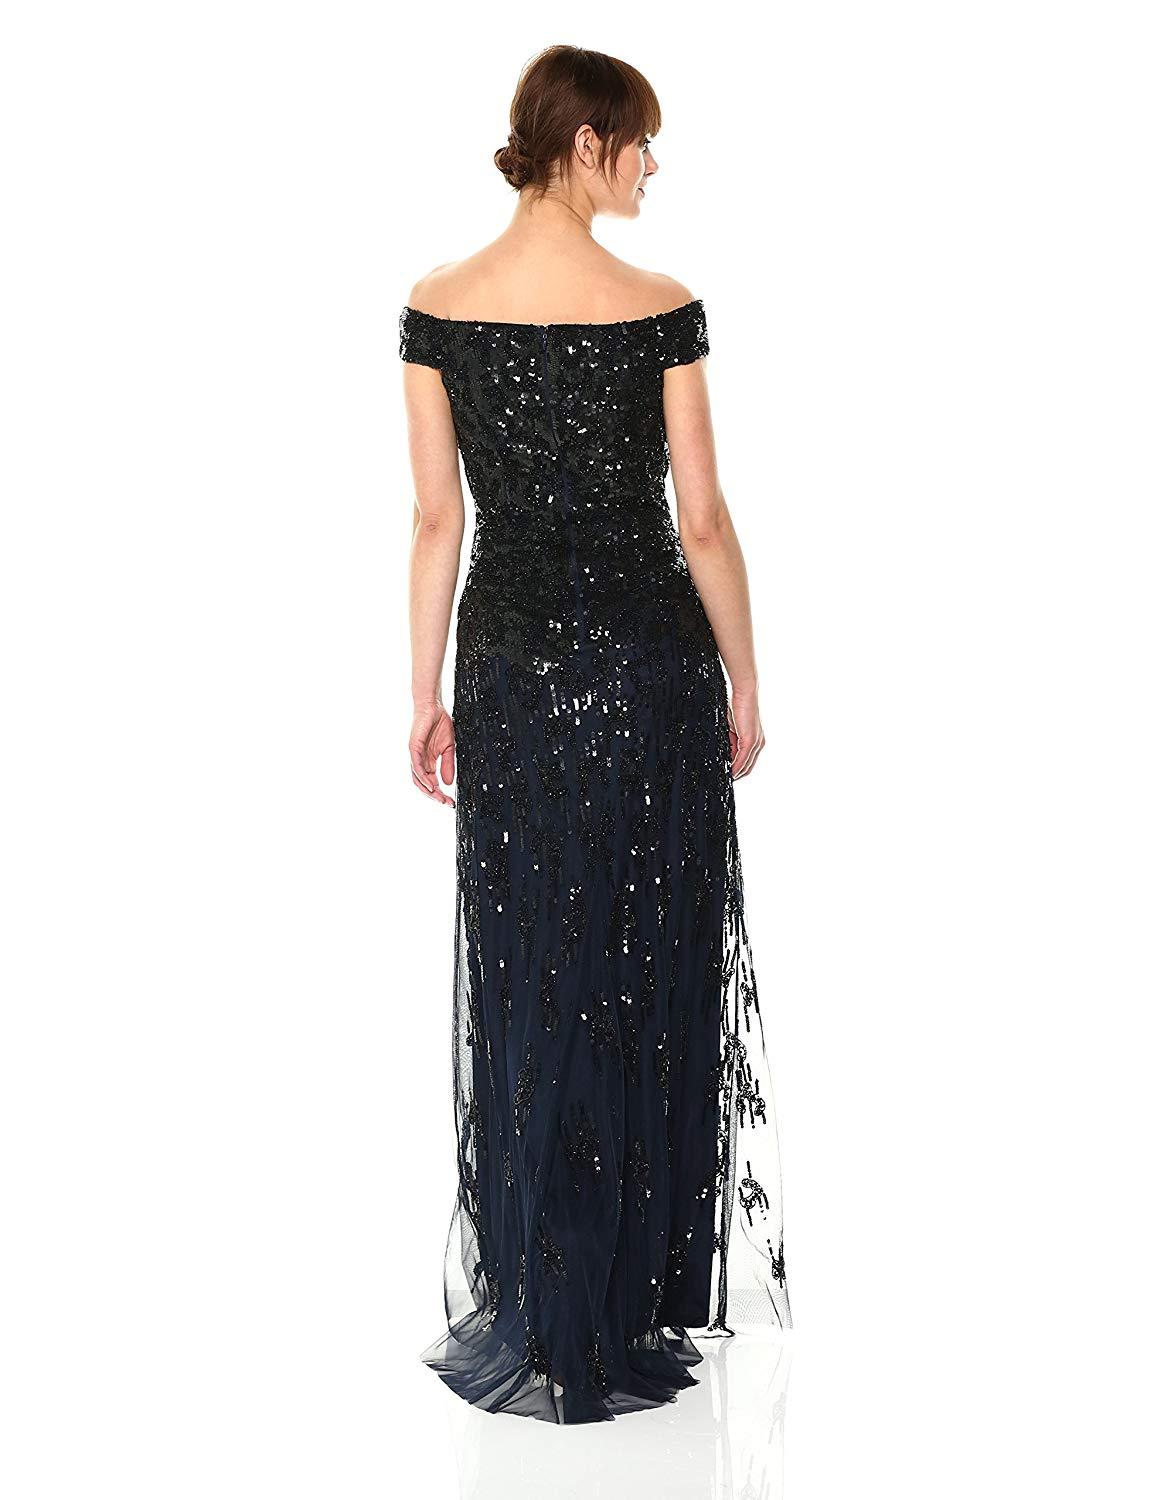 Adrianna Papell - AP1E202441 Embellished Off-Shoulder Evening Gown In Blue and Black